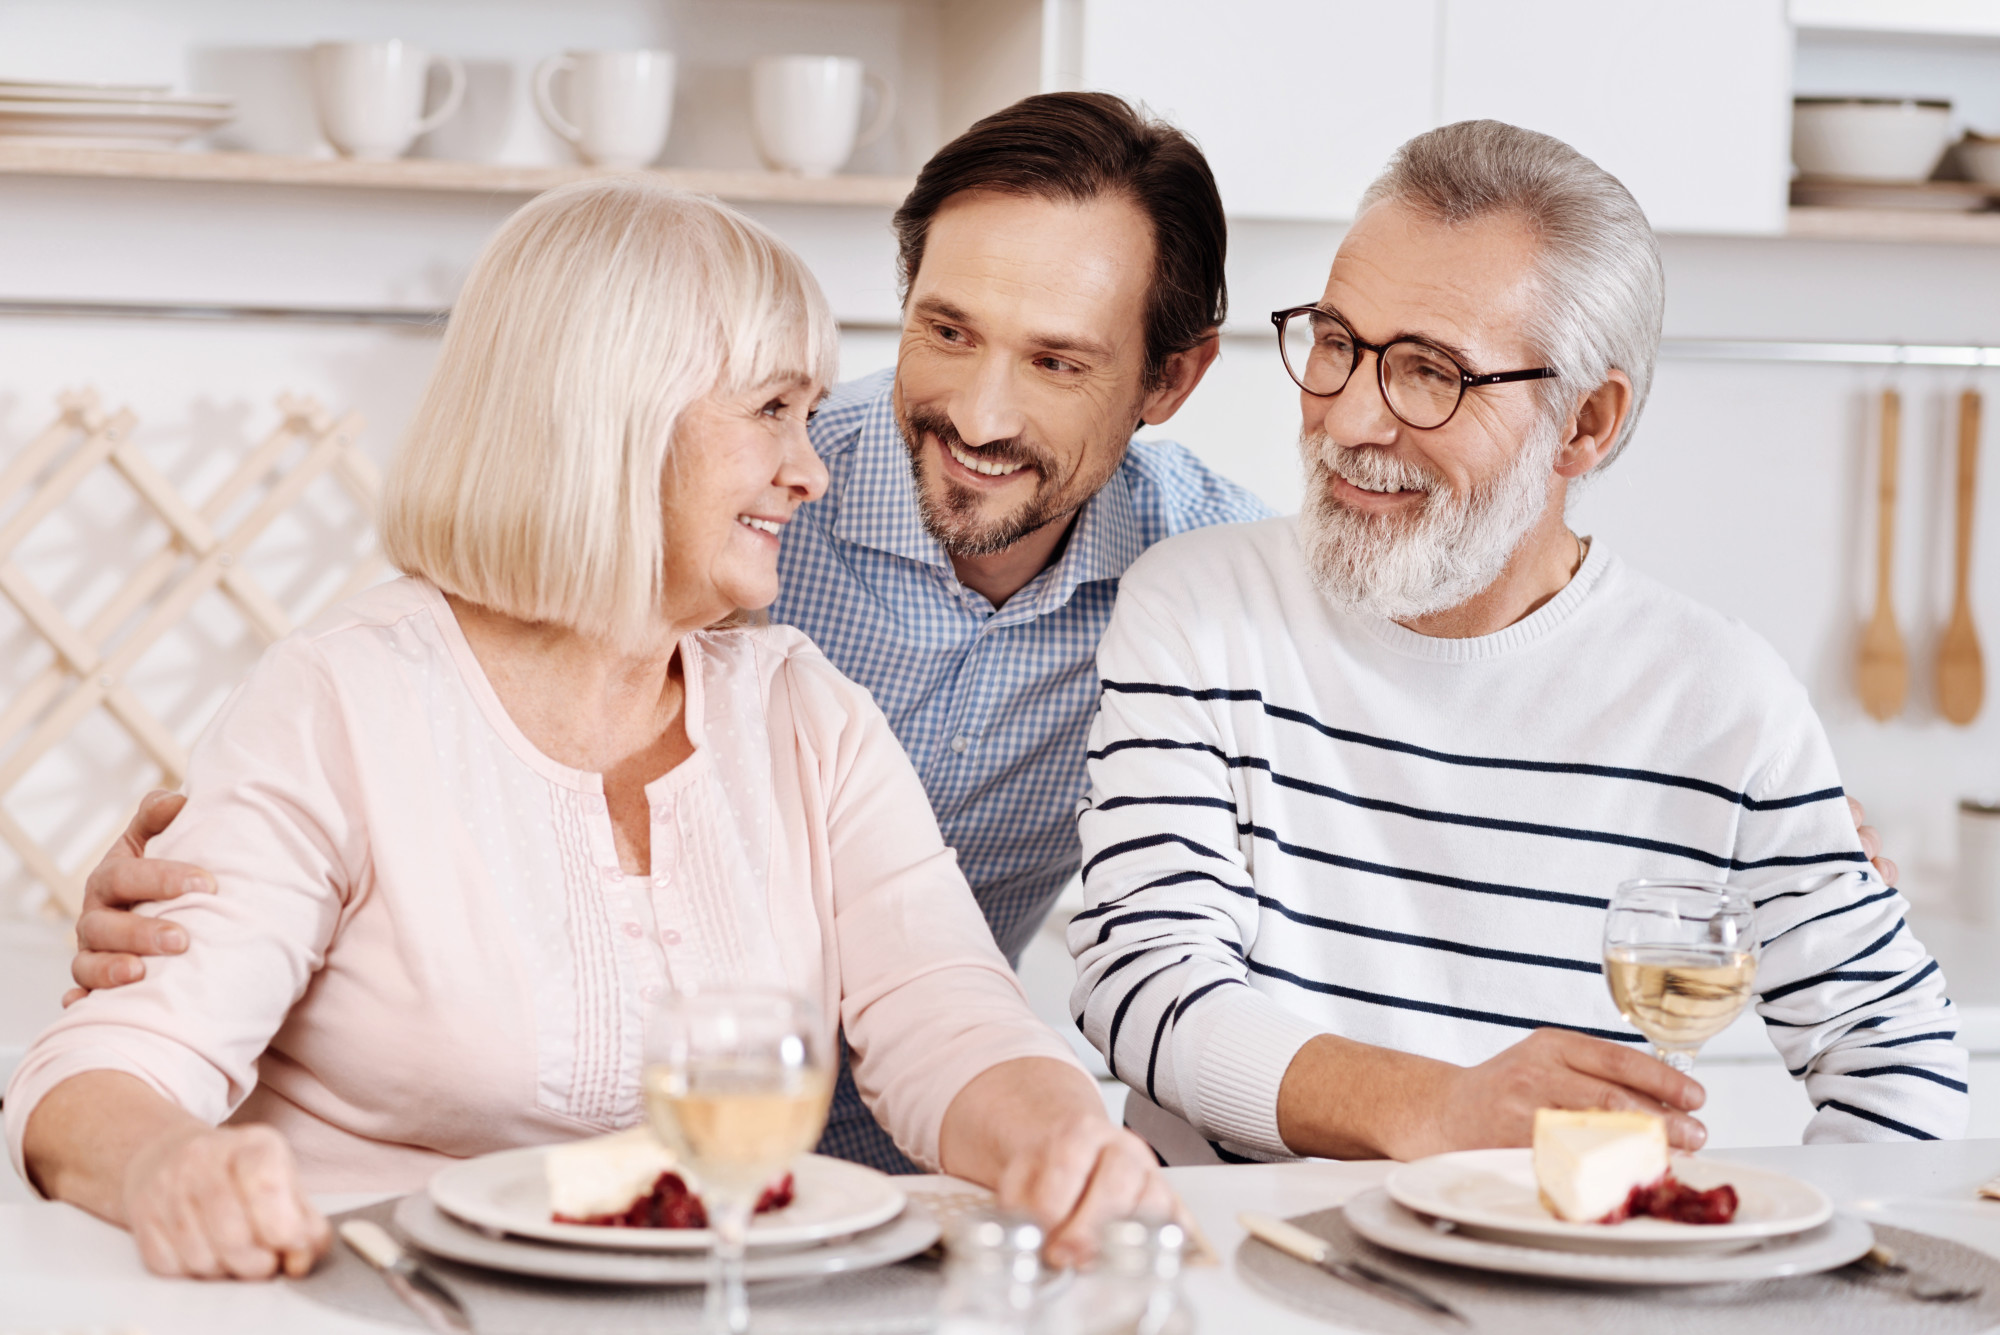 Caring for Elderly Parents: 11 Top Tips for Taking Care of Mom and Dad